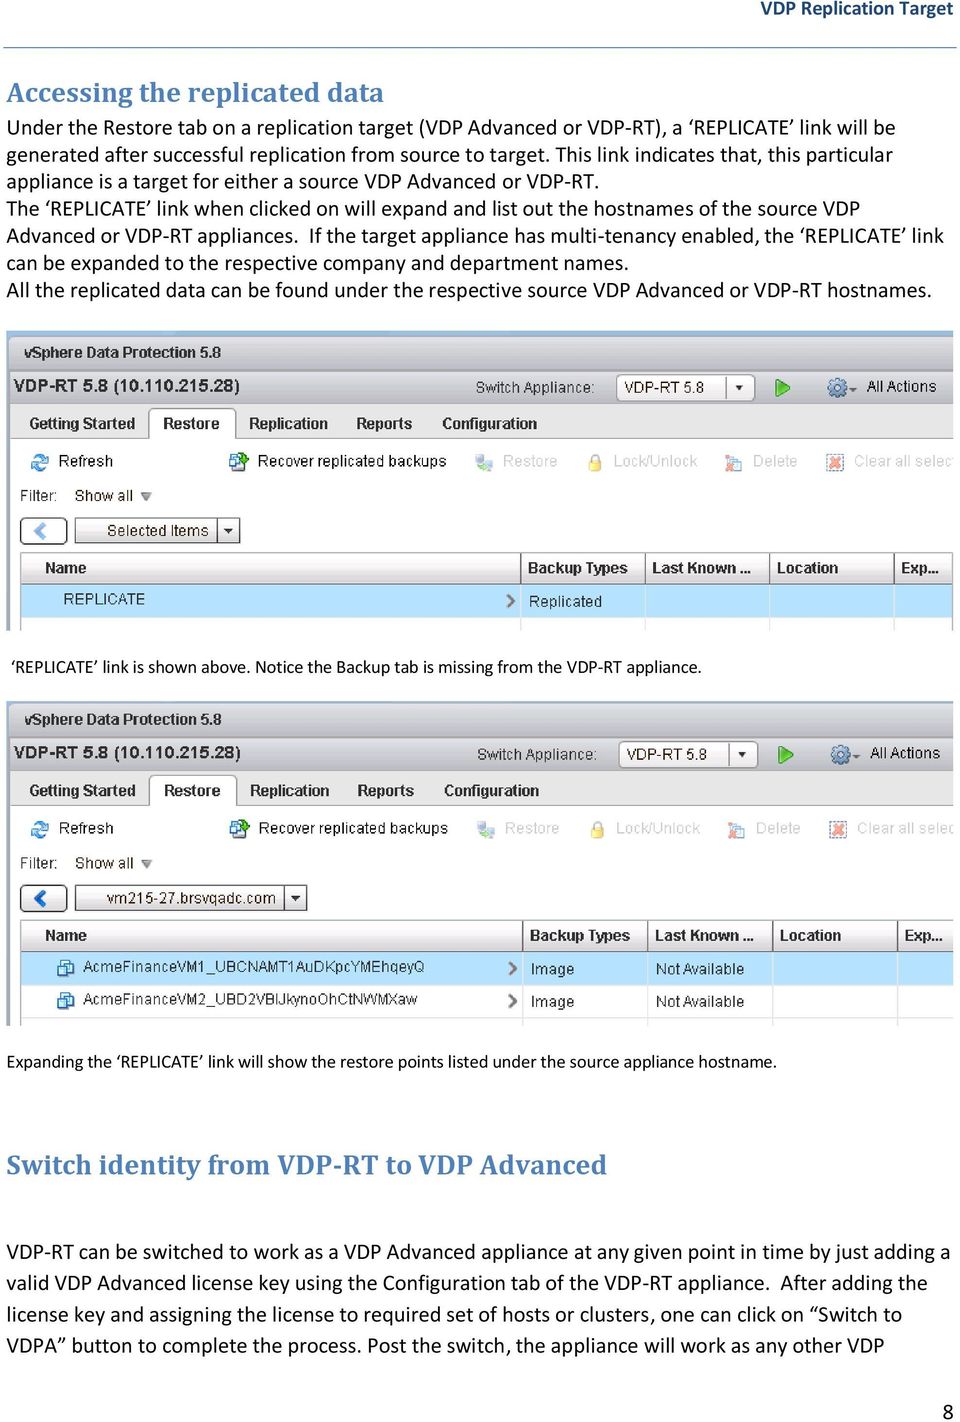 The REPLICATE link when clicked on will expand and list out the hostnames of the source VDP Advanced or VDP-RT appliances.